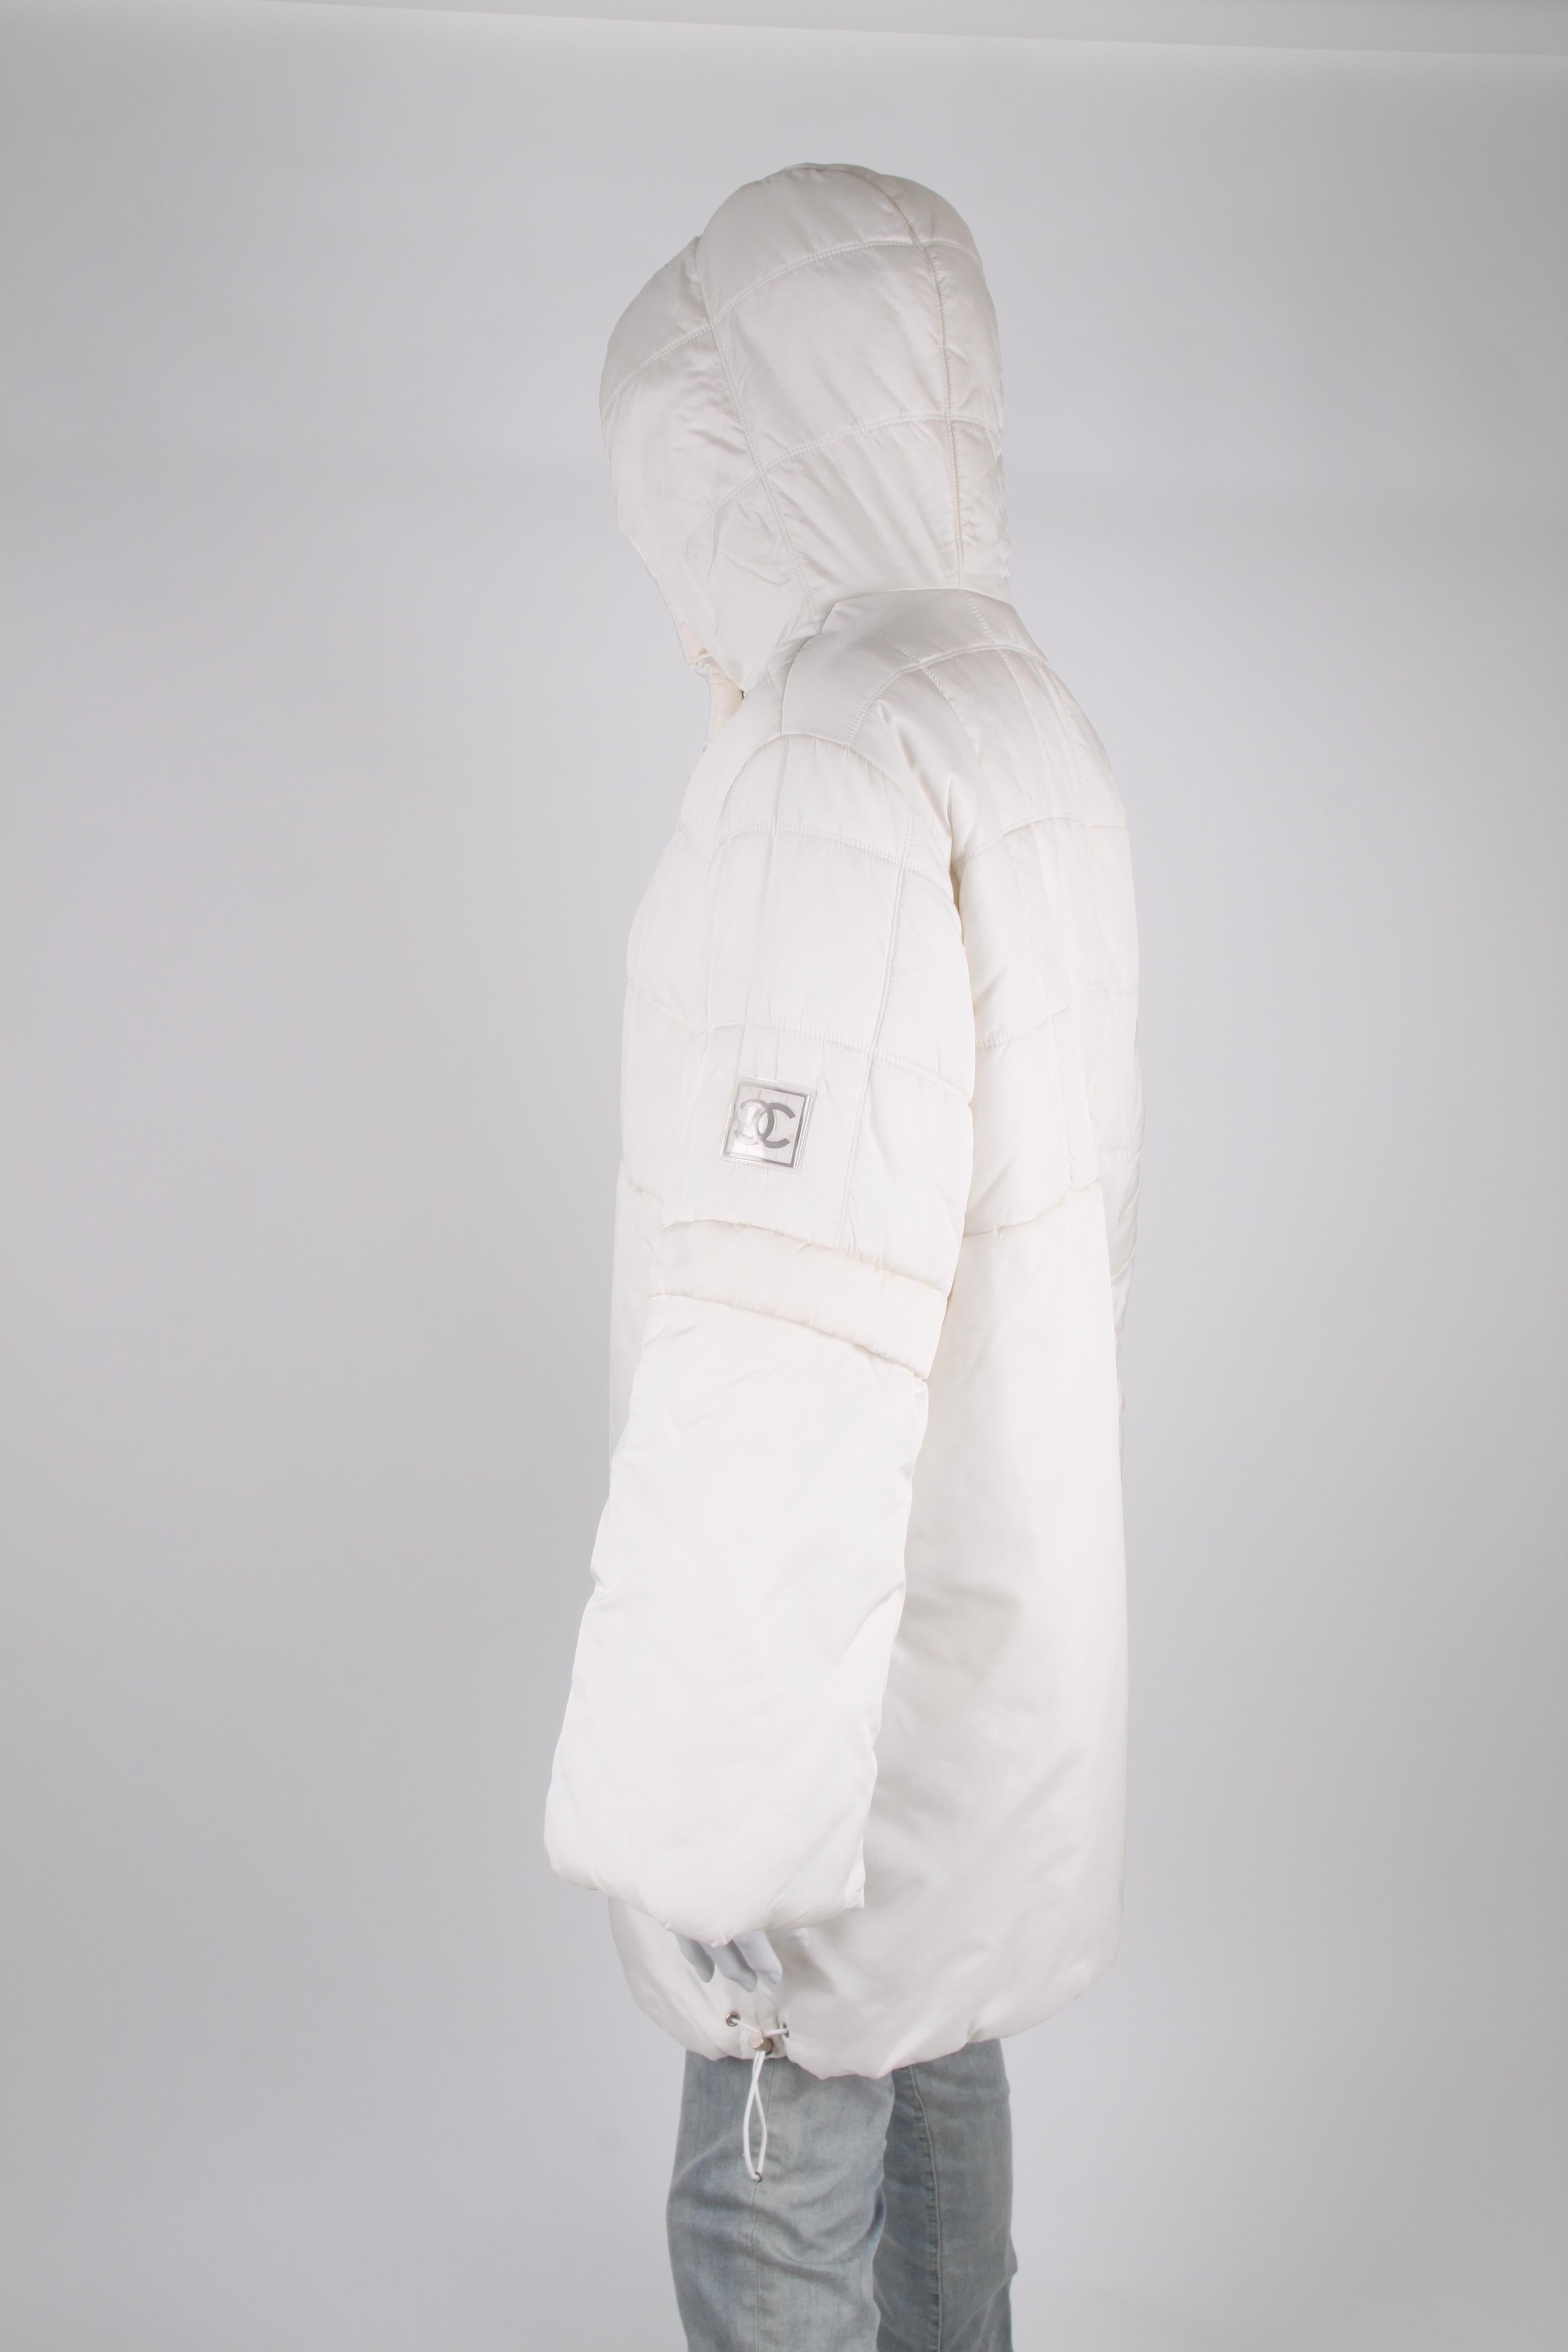 Chanel Oversized Coat - white autumn collection 2000 For Sale 5